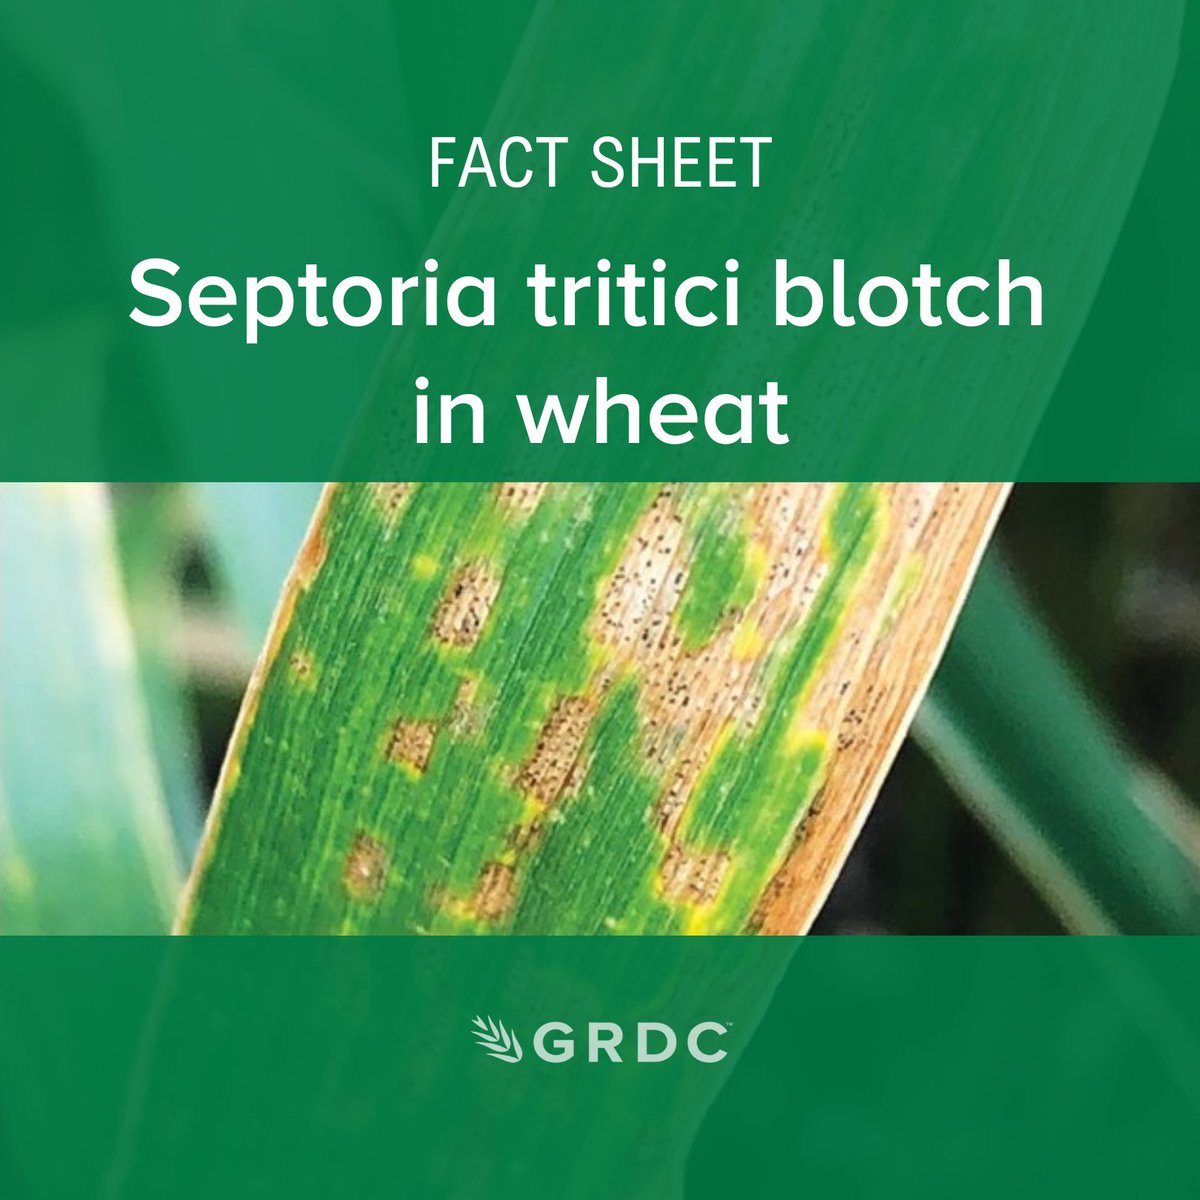 Septoria tritici blotch (STB) has been found in wheat paddocks across the southern grain growing region. It could get worse. Look for the telltale signs of #septoria & read up on the most effective ways to manage it in our #septoria fact sheet: bit.ly/3Qoq5K7